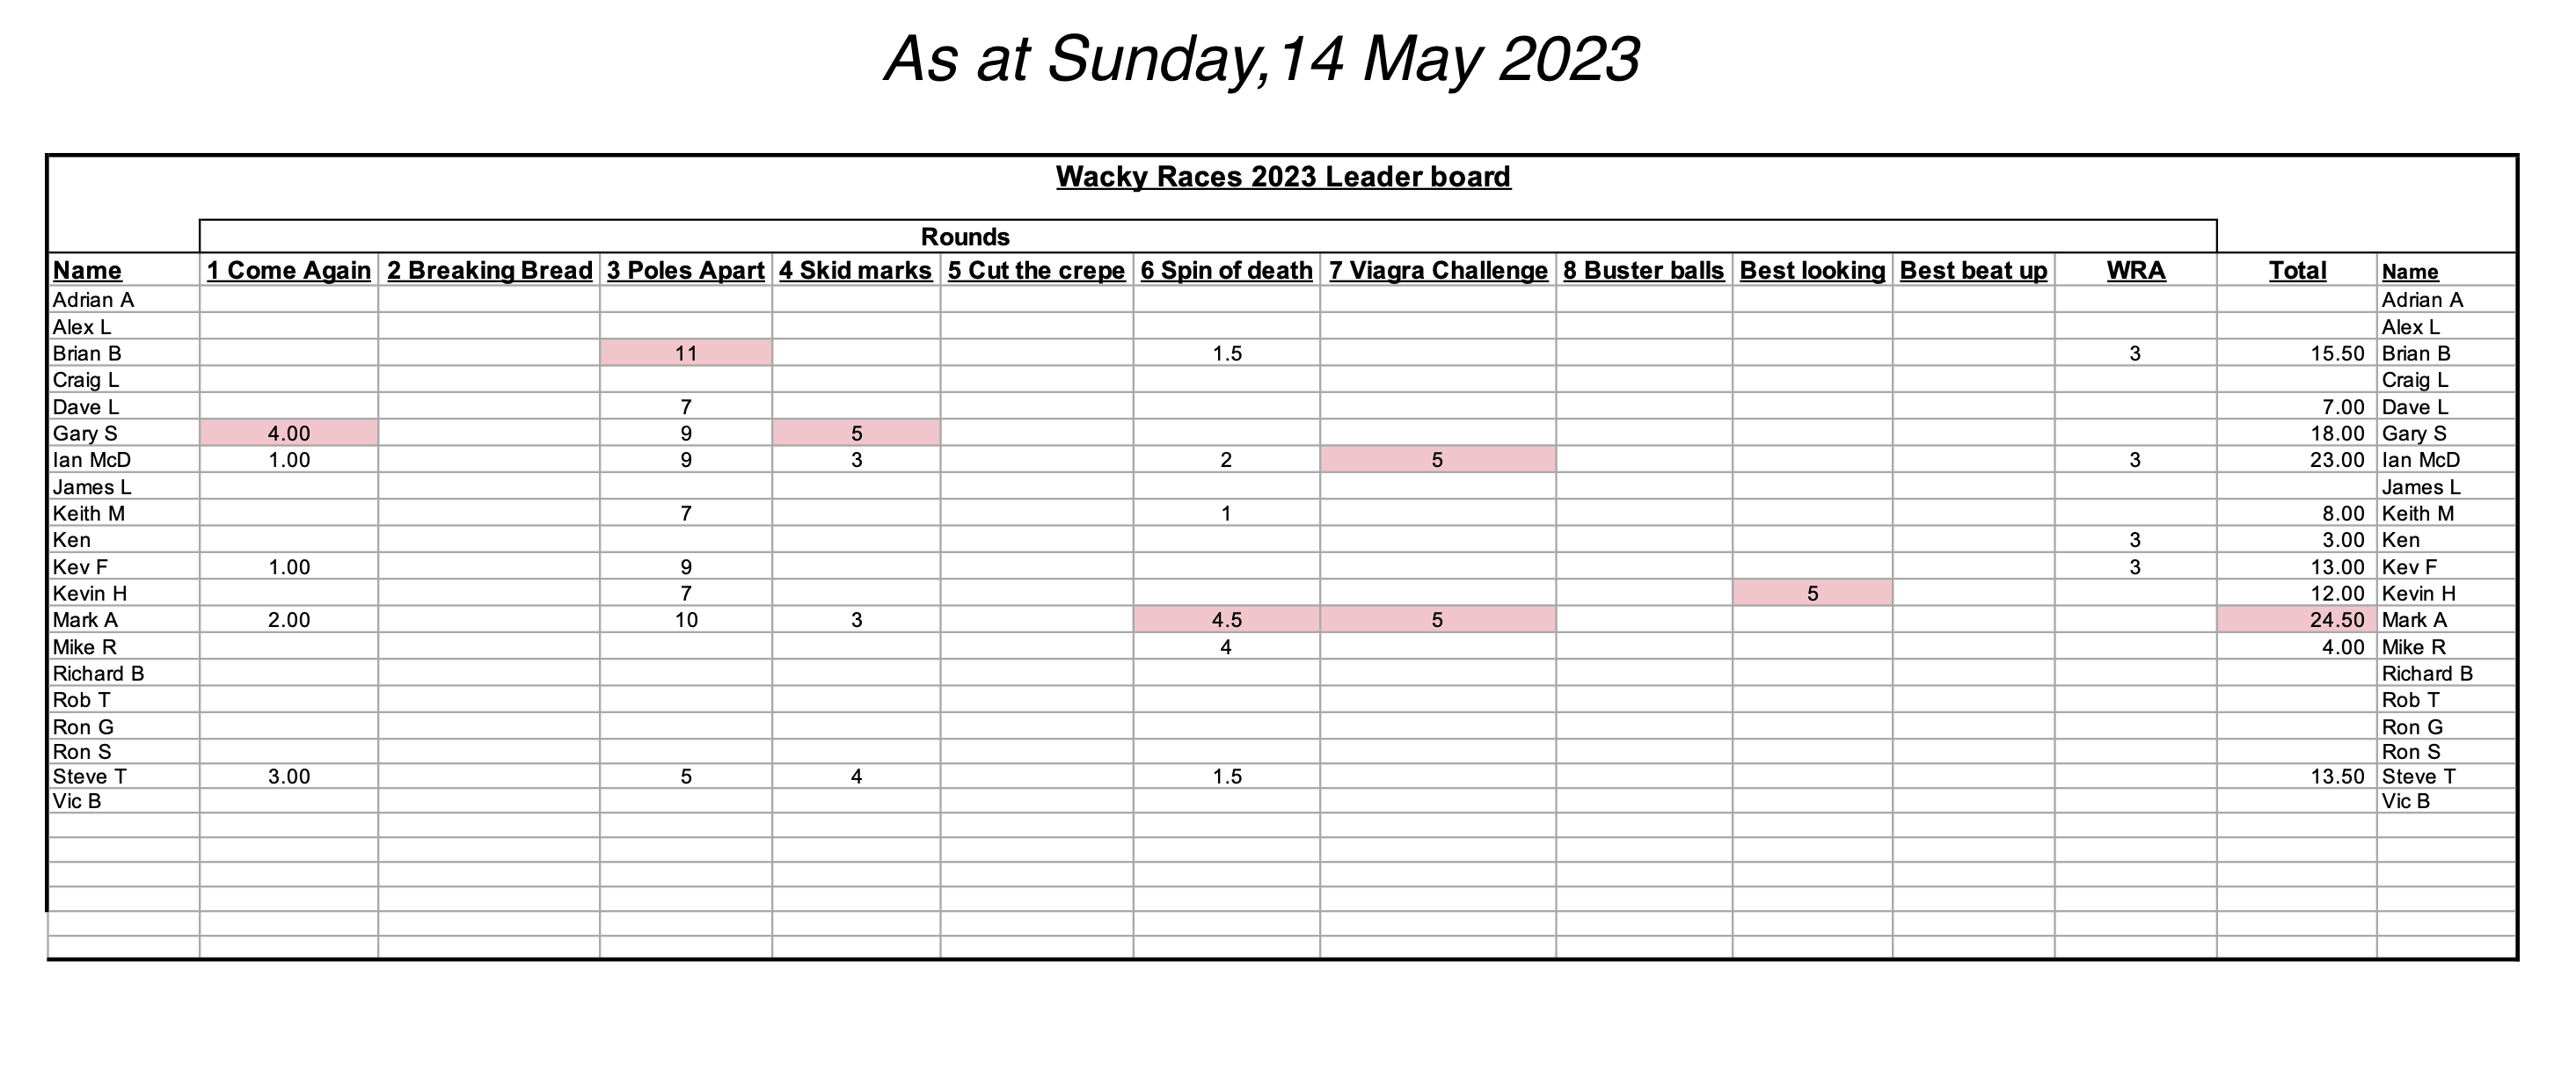 2023 Wacky Races Scorecard. If you don't see the image, try clicking this text.